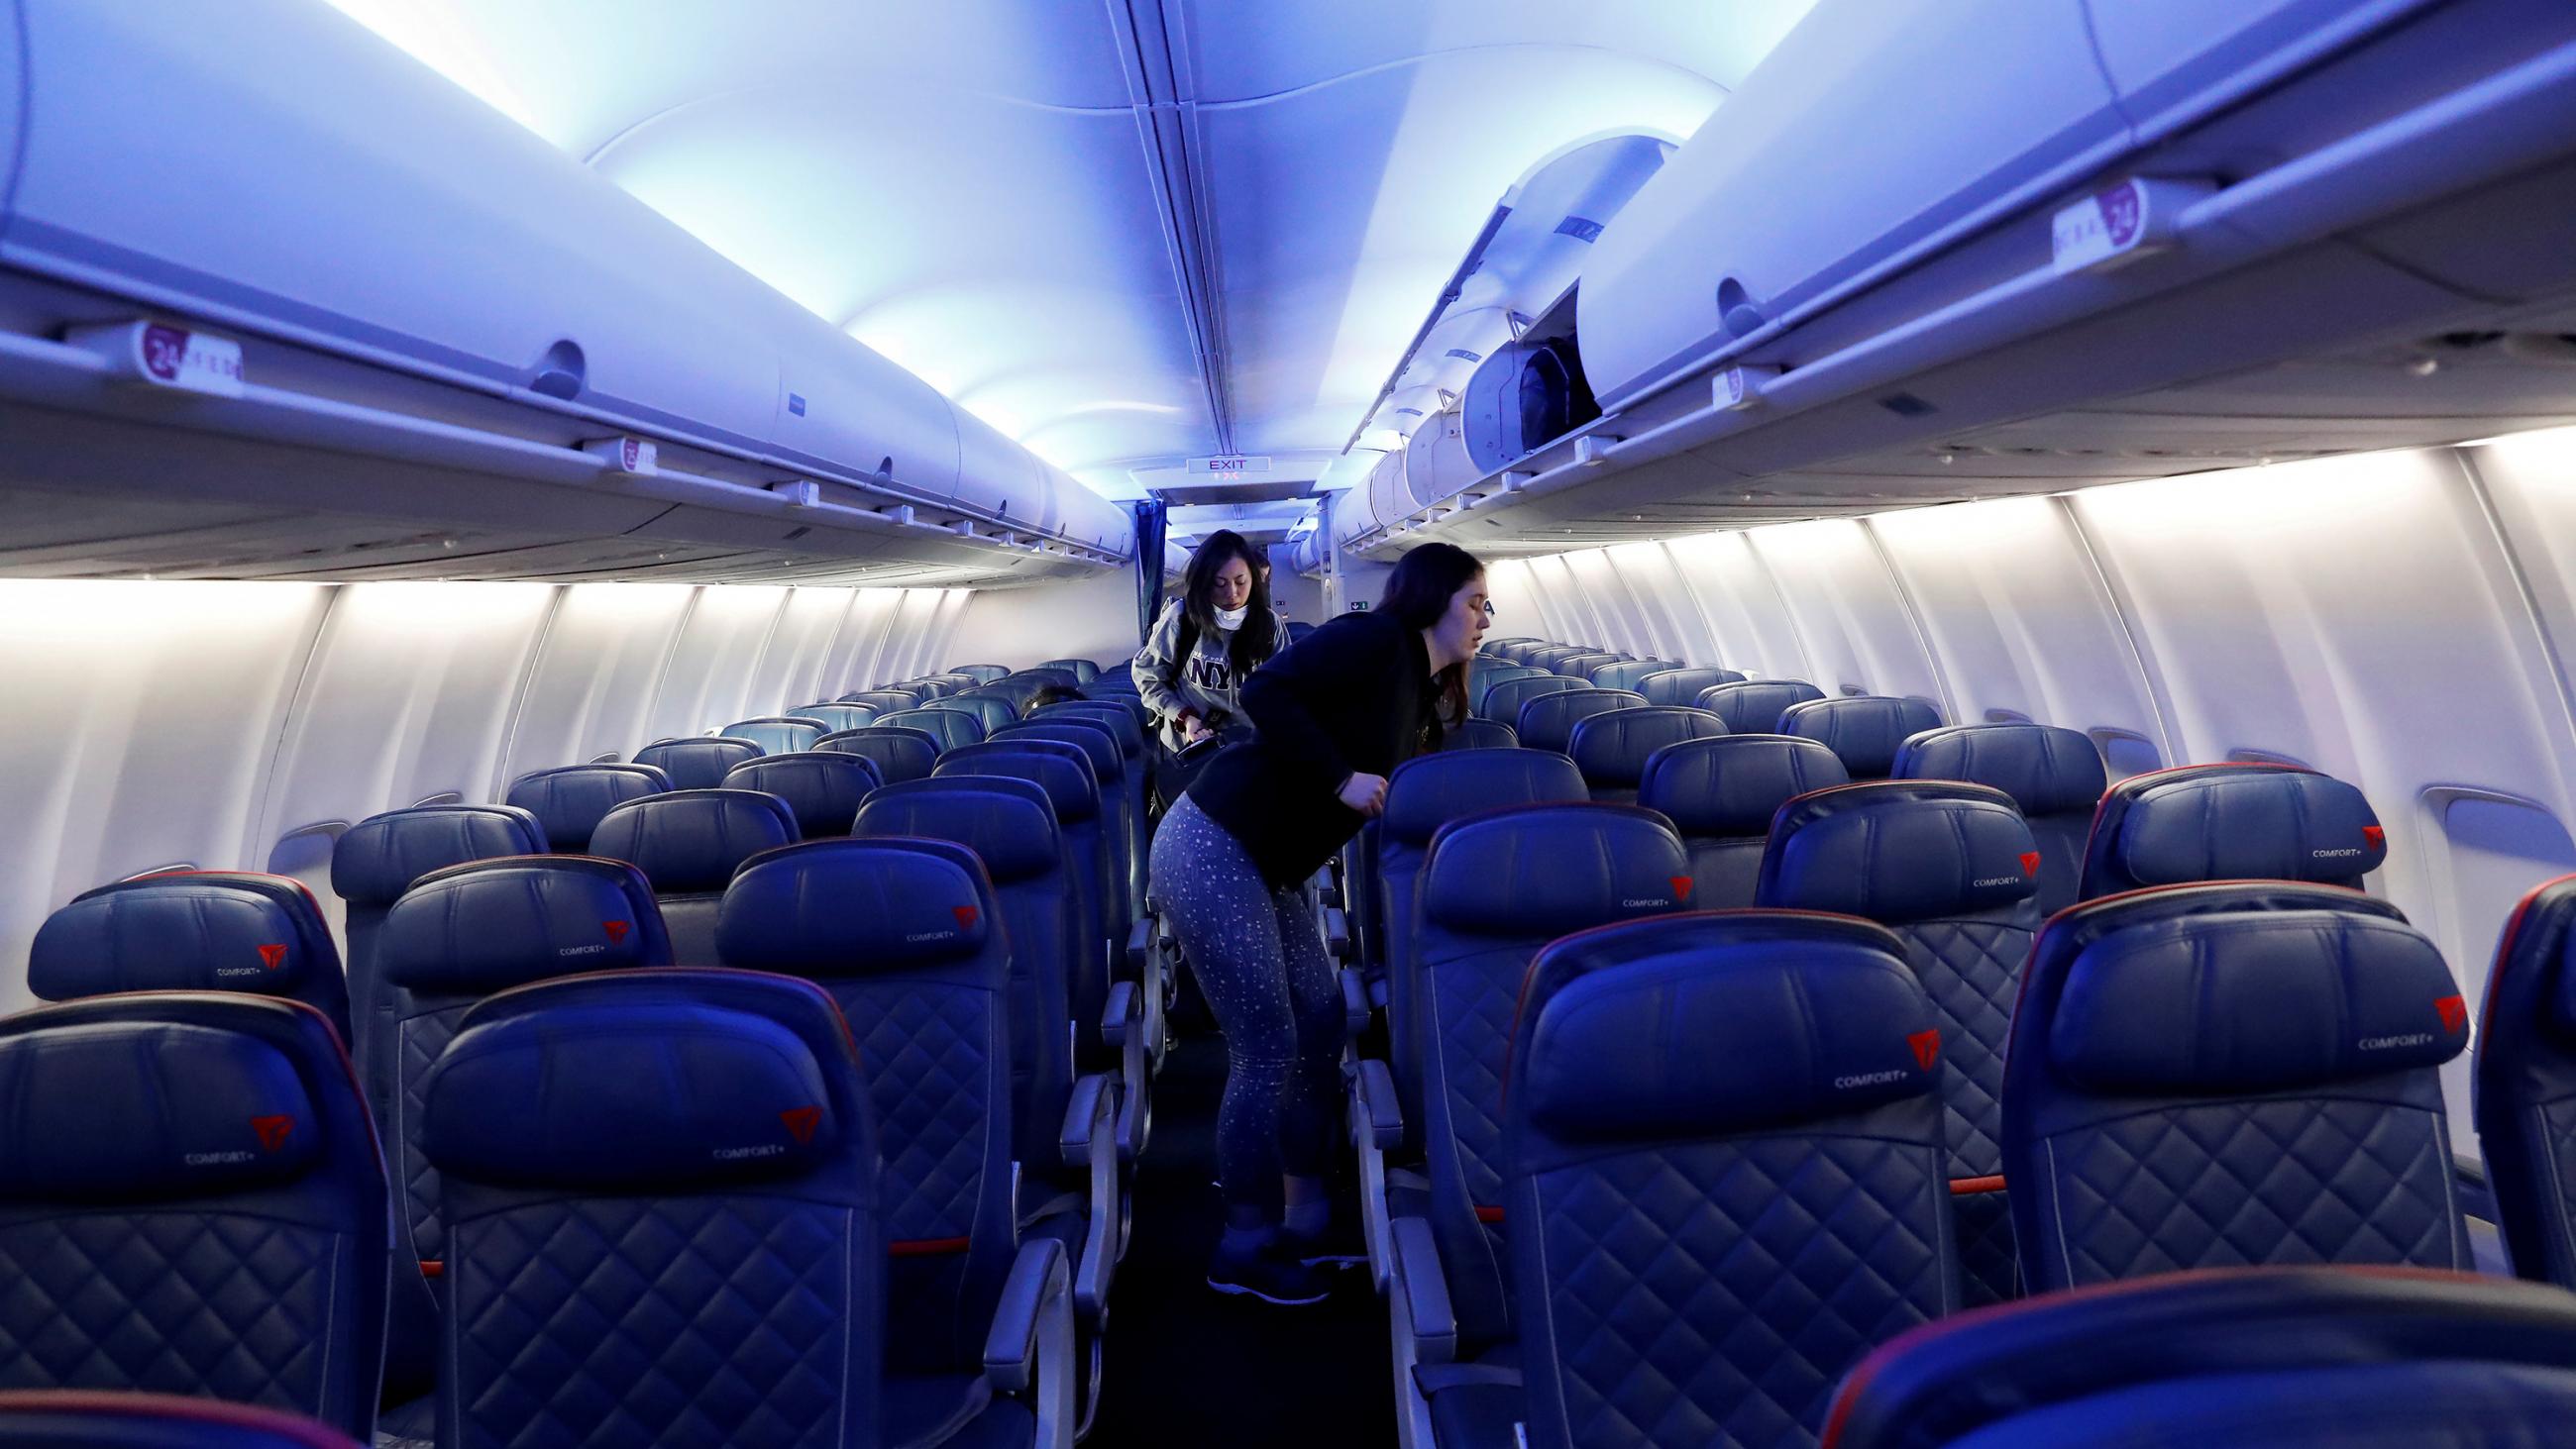 The photo shows a large jet passenger plane nearly empty of people. 